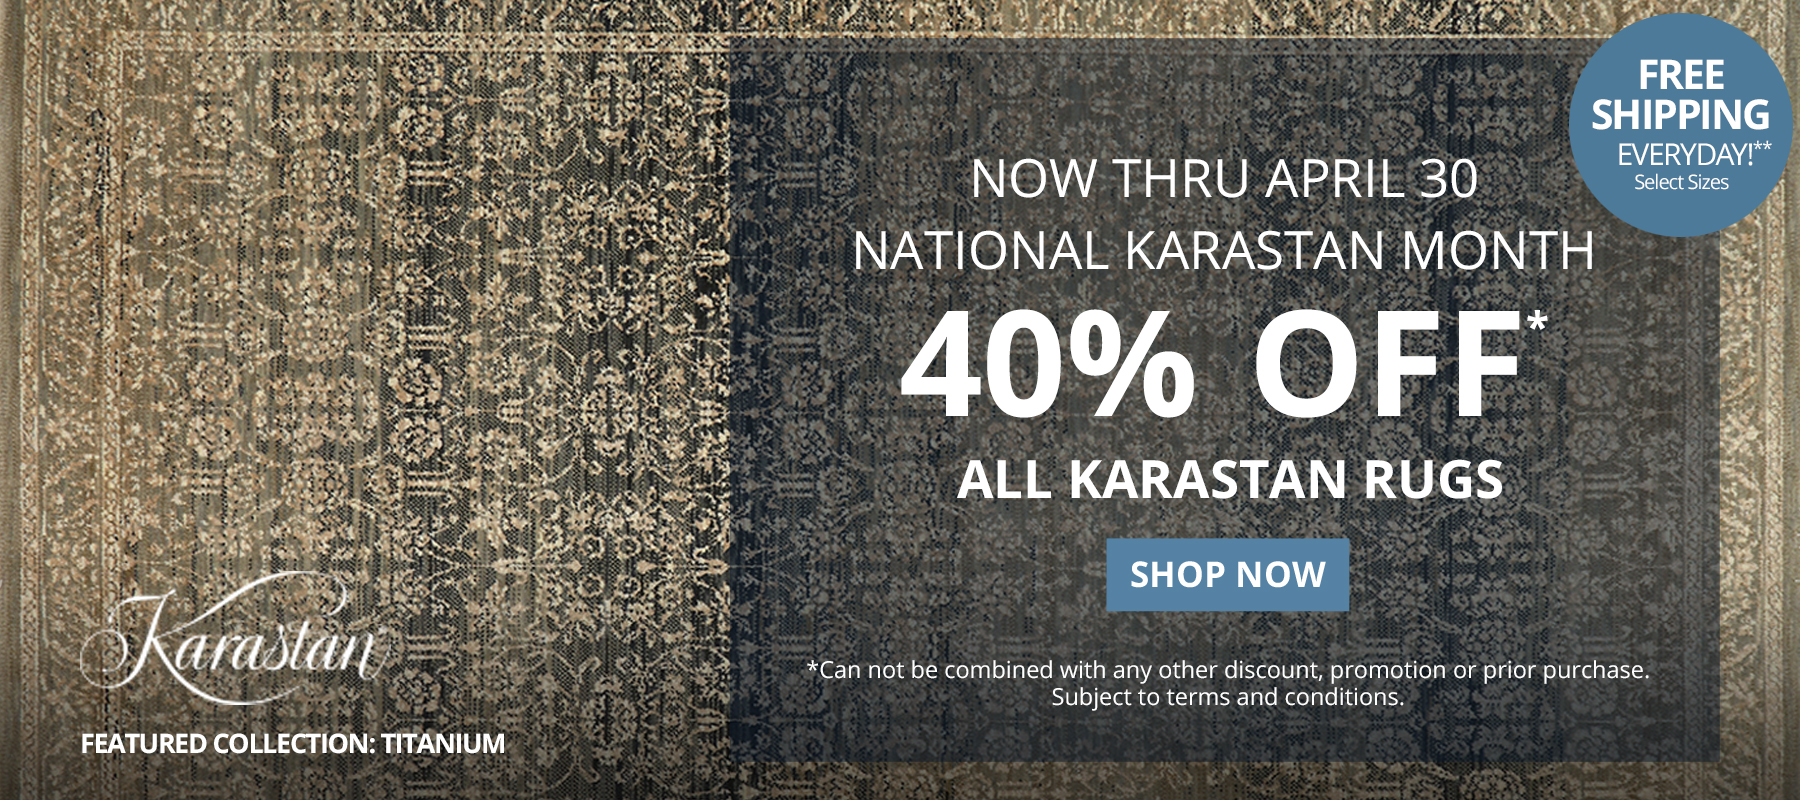 Now Thru April 300. National Karastan Month. 40% Off* All Karastan Rugs. Free Shipping Everyday!** Select Sizes. *Can not be combined with any other discount, promotion or prior purchase. Subject to terms and conditions. Shop Now.